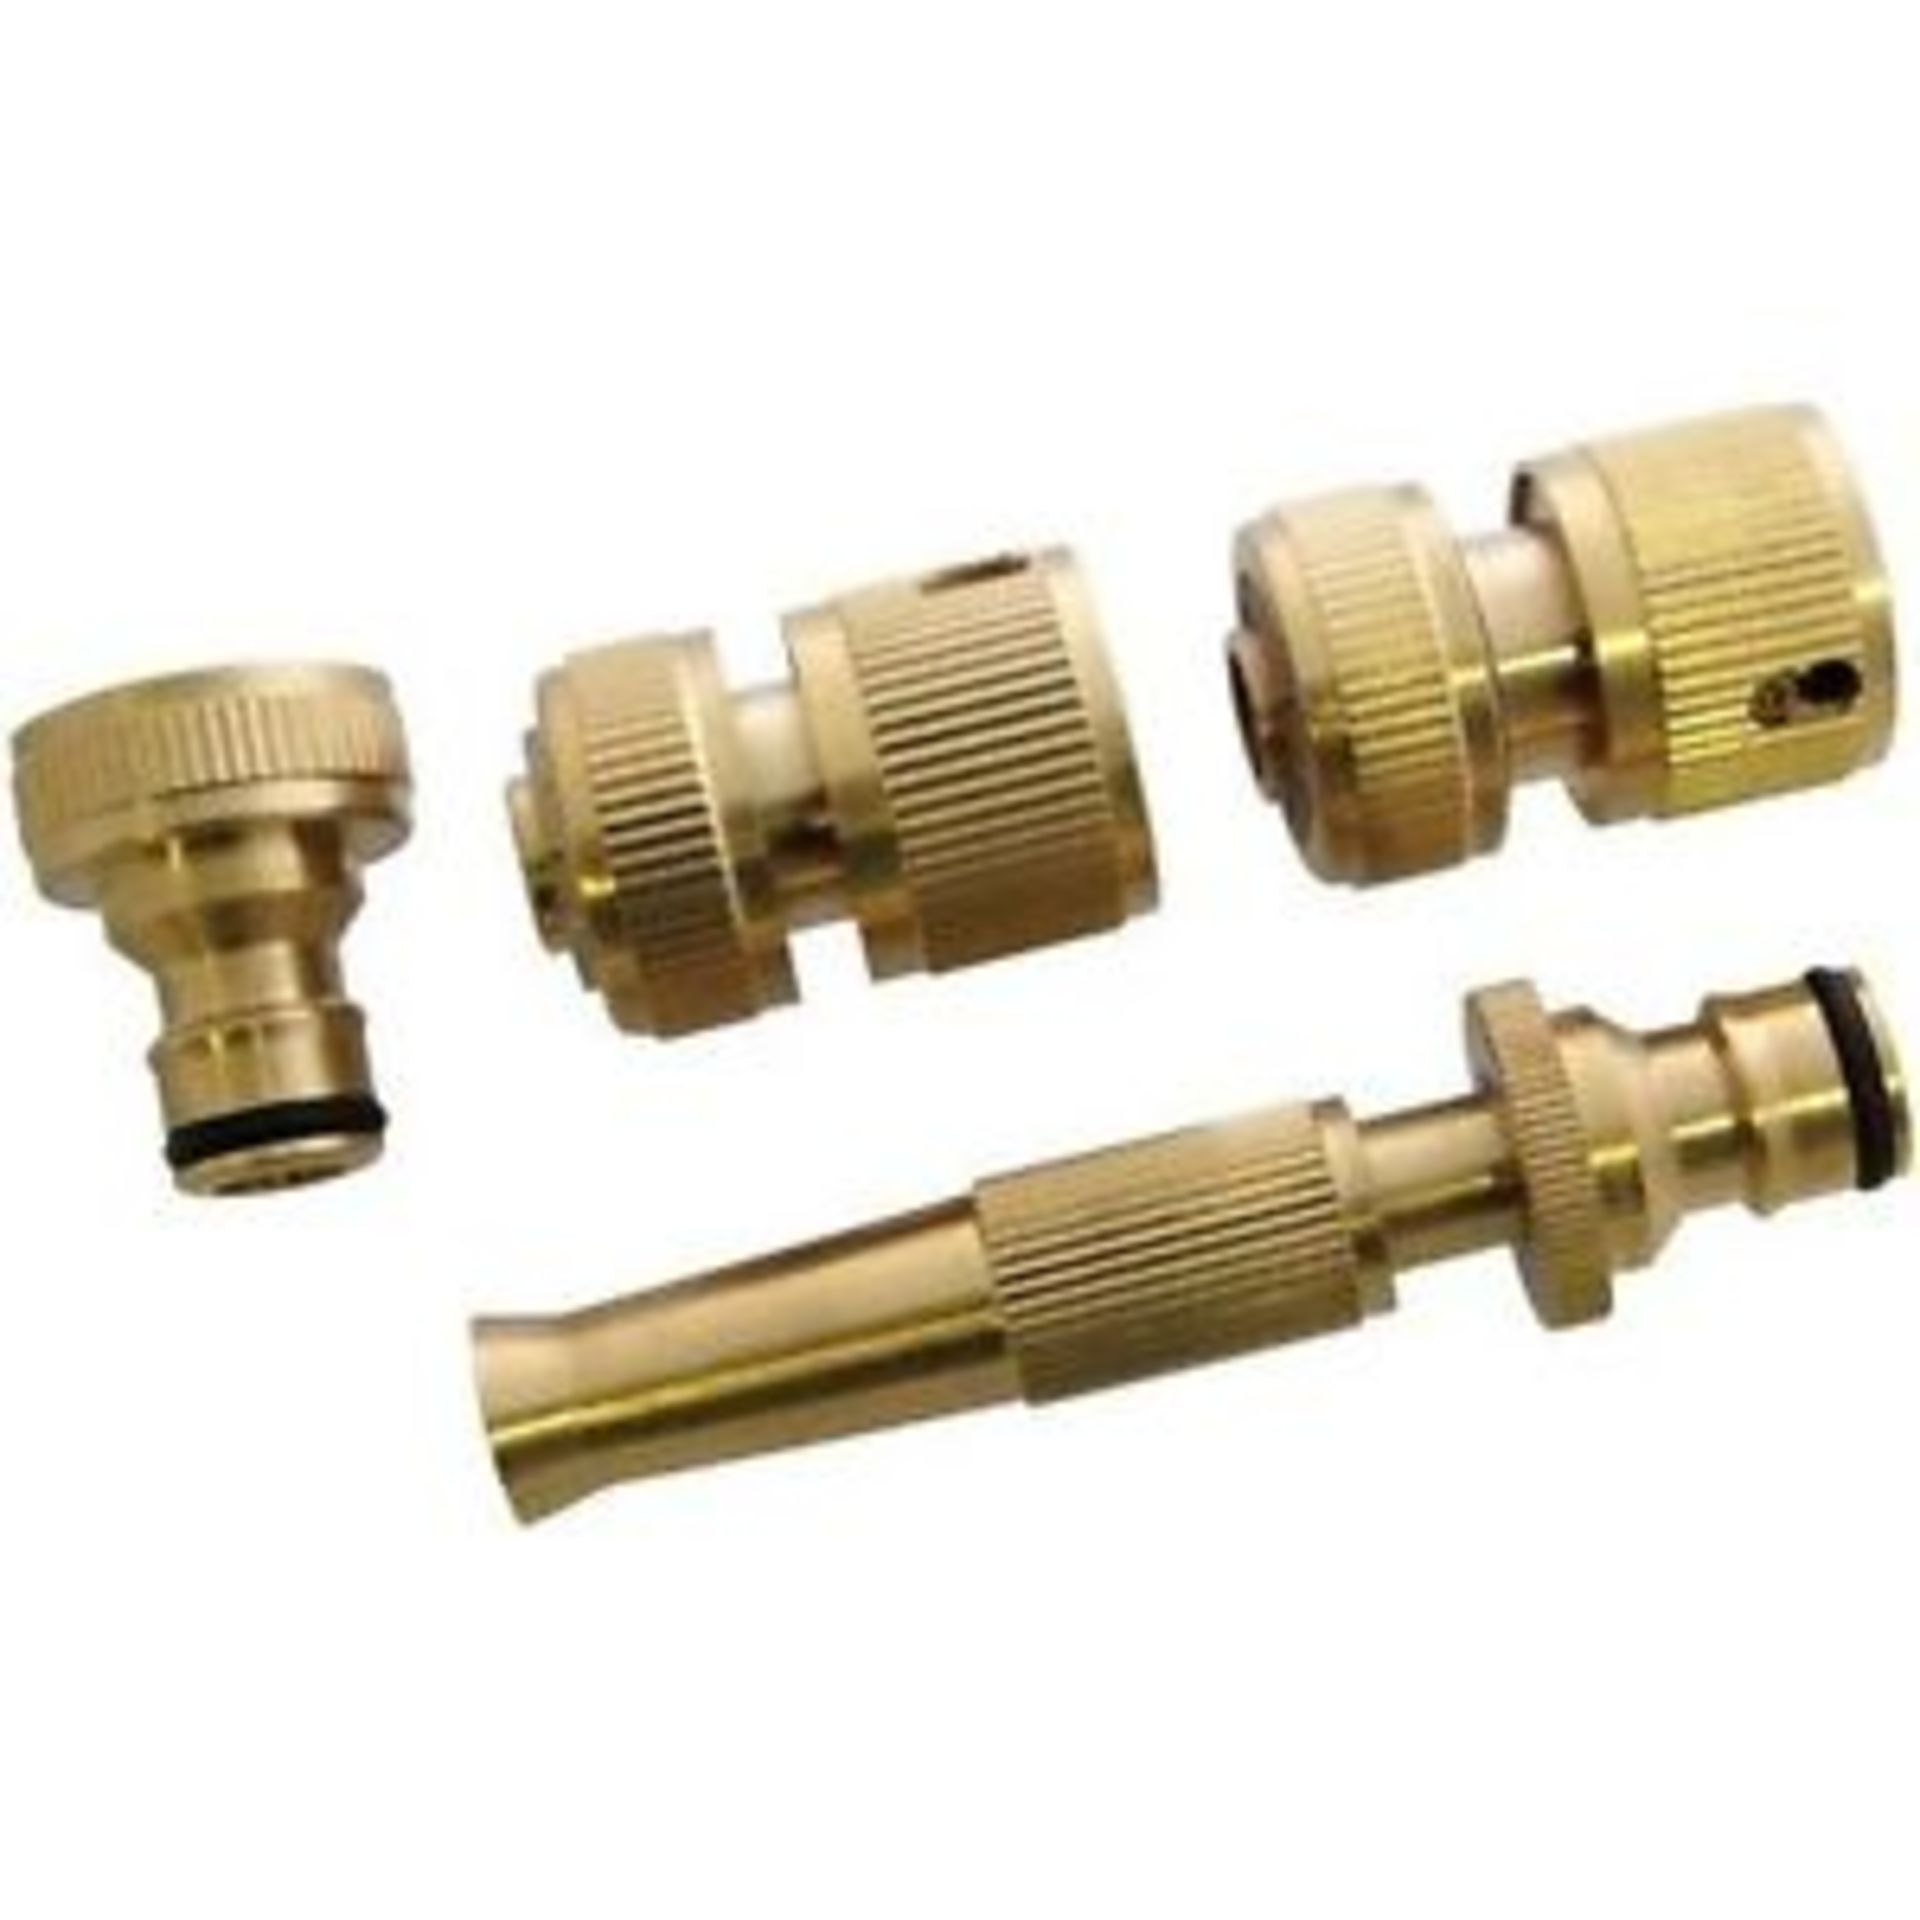 V Brand New 4pc Brass Hose Fitting Set With Spray Nozzle 3/4inch Tap Connector (Fits Most Outside